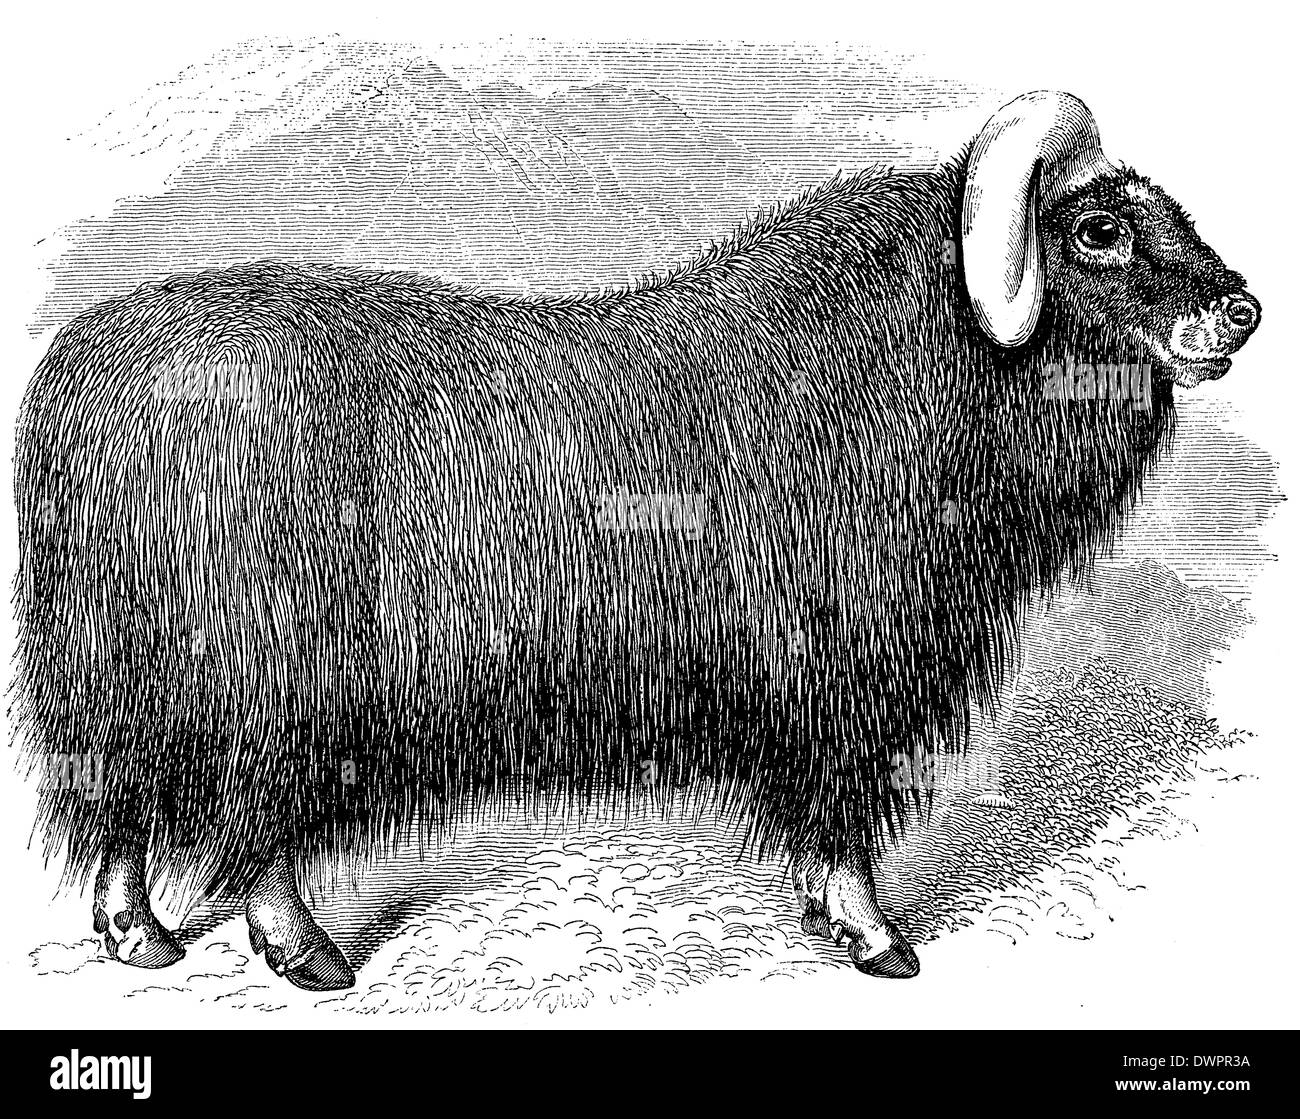 Musk-ox or musk ox Stock Photo